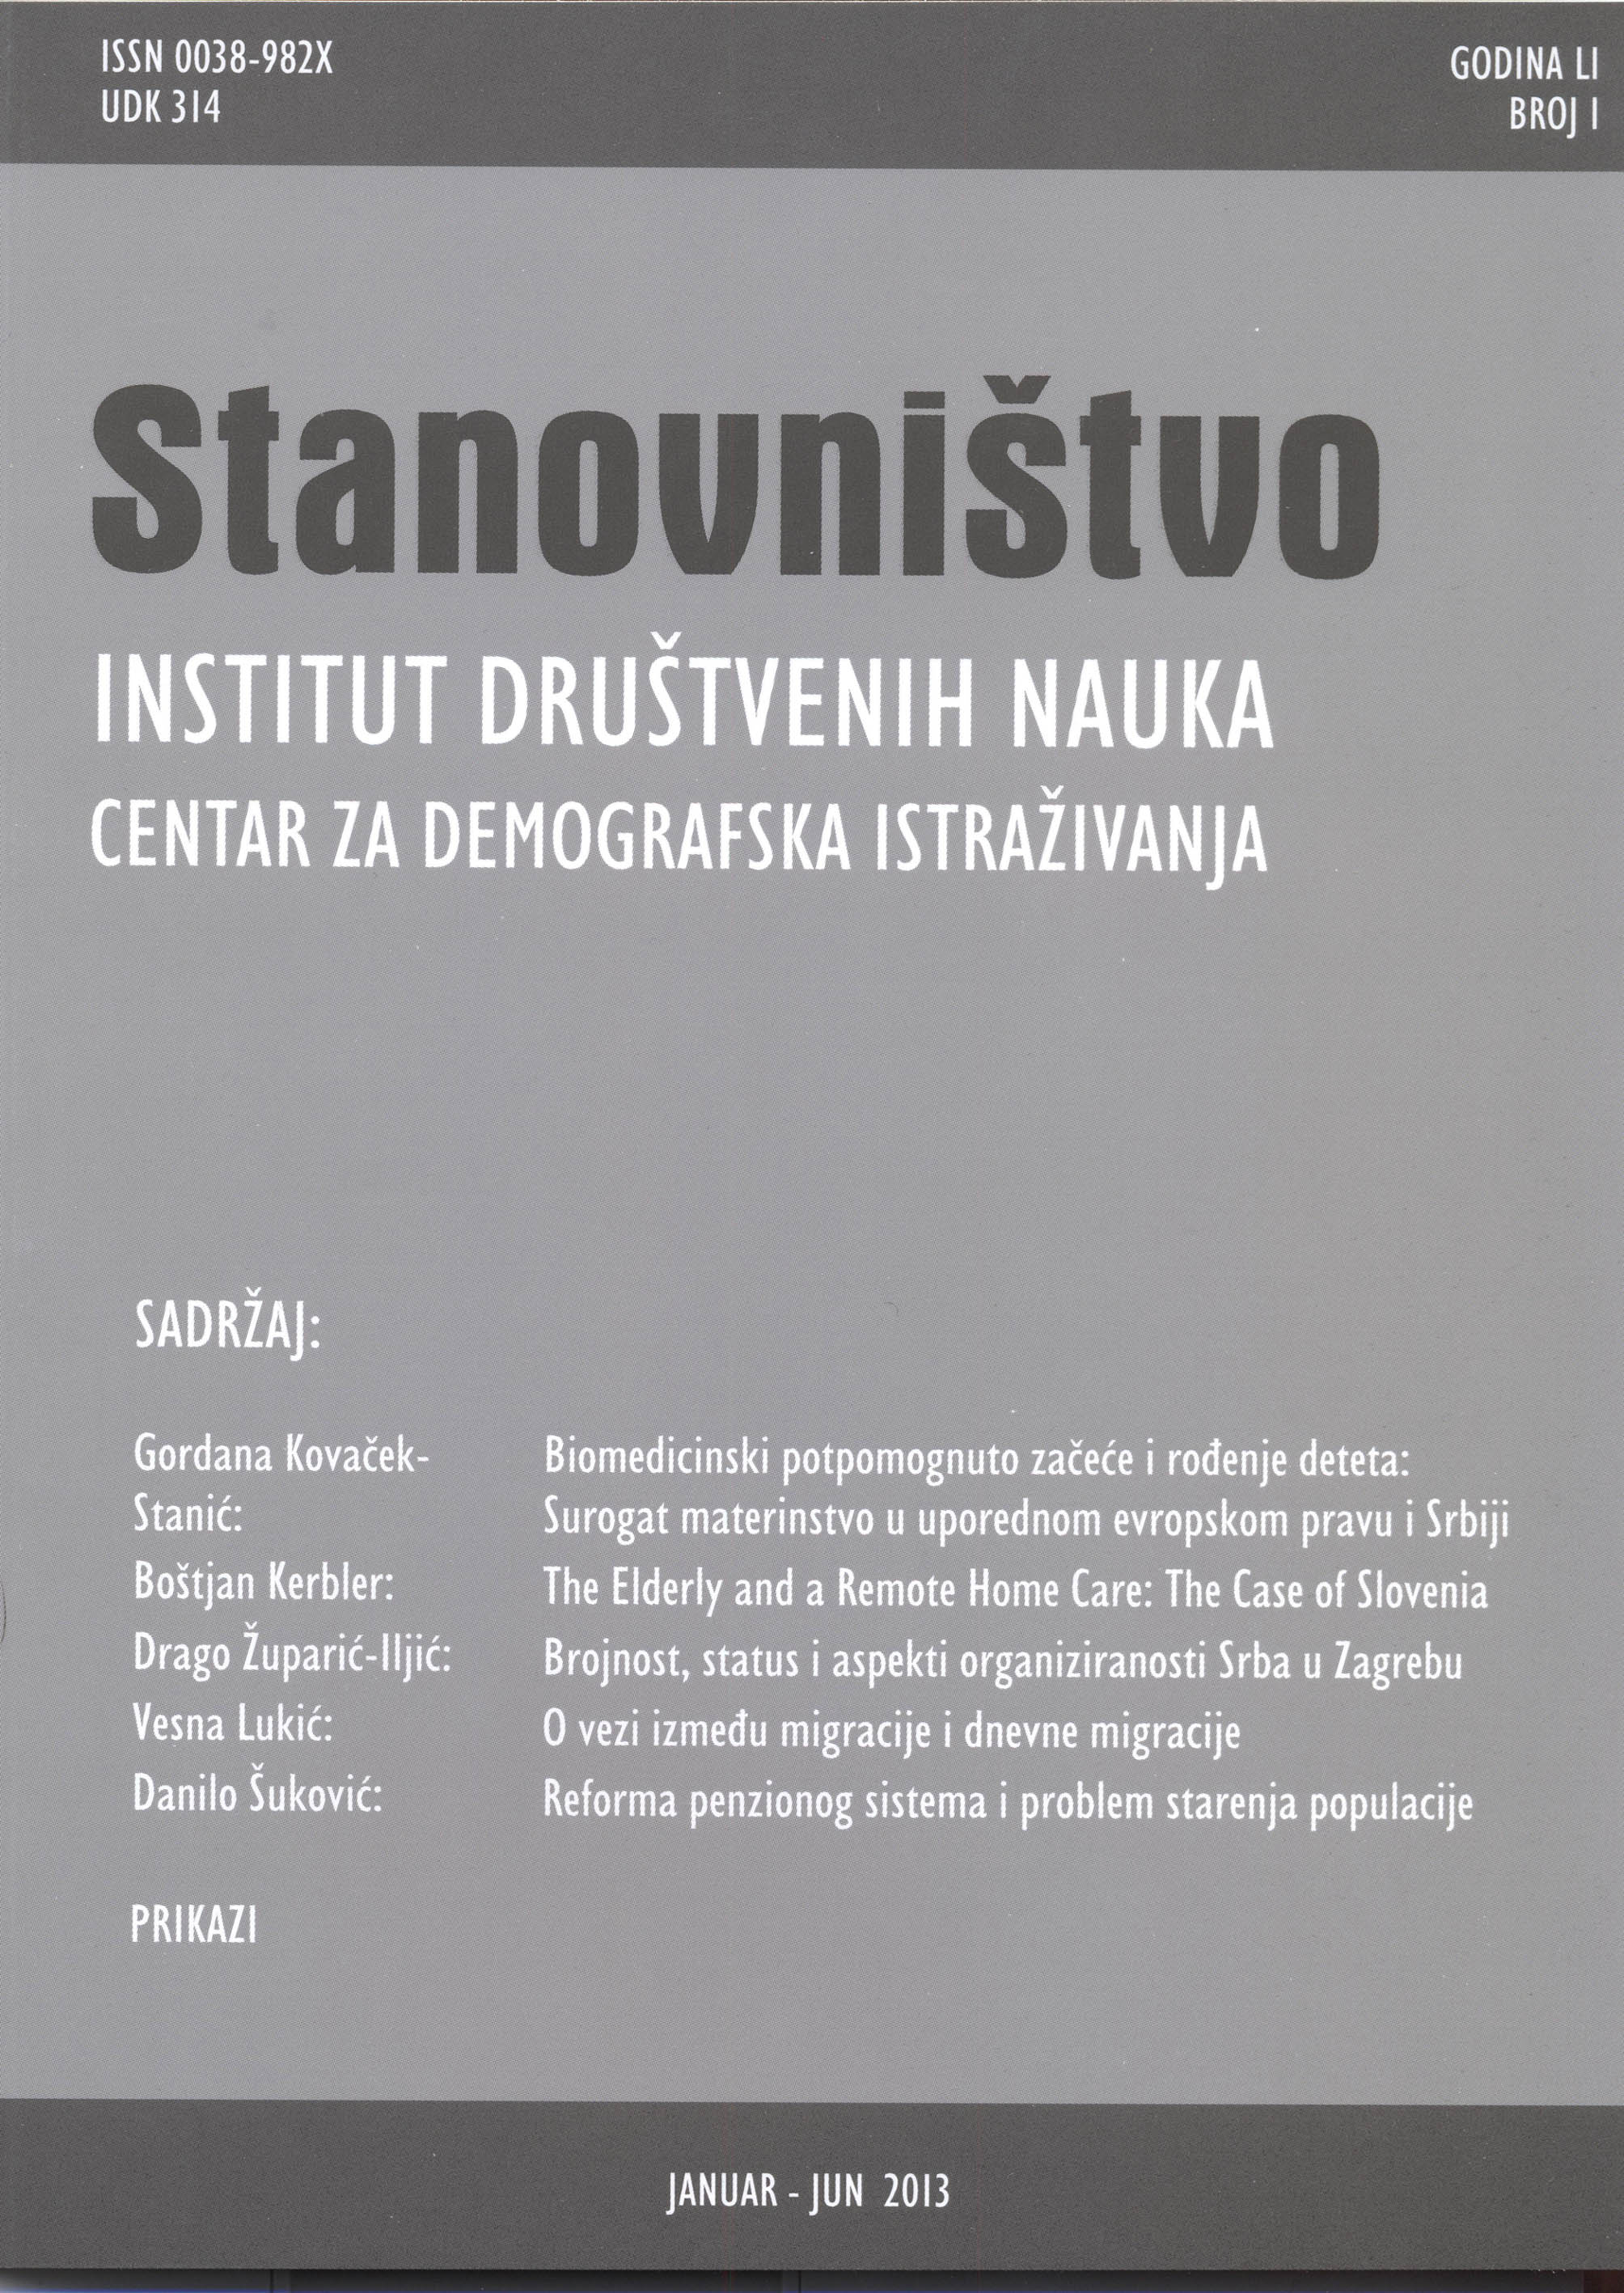 The elderly and a remote home care: the case of Slovenia